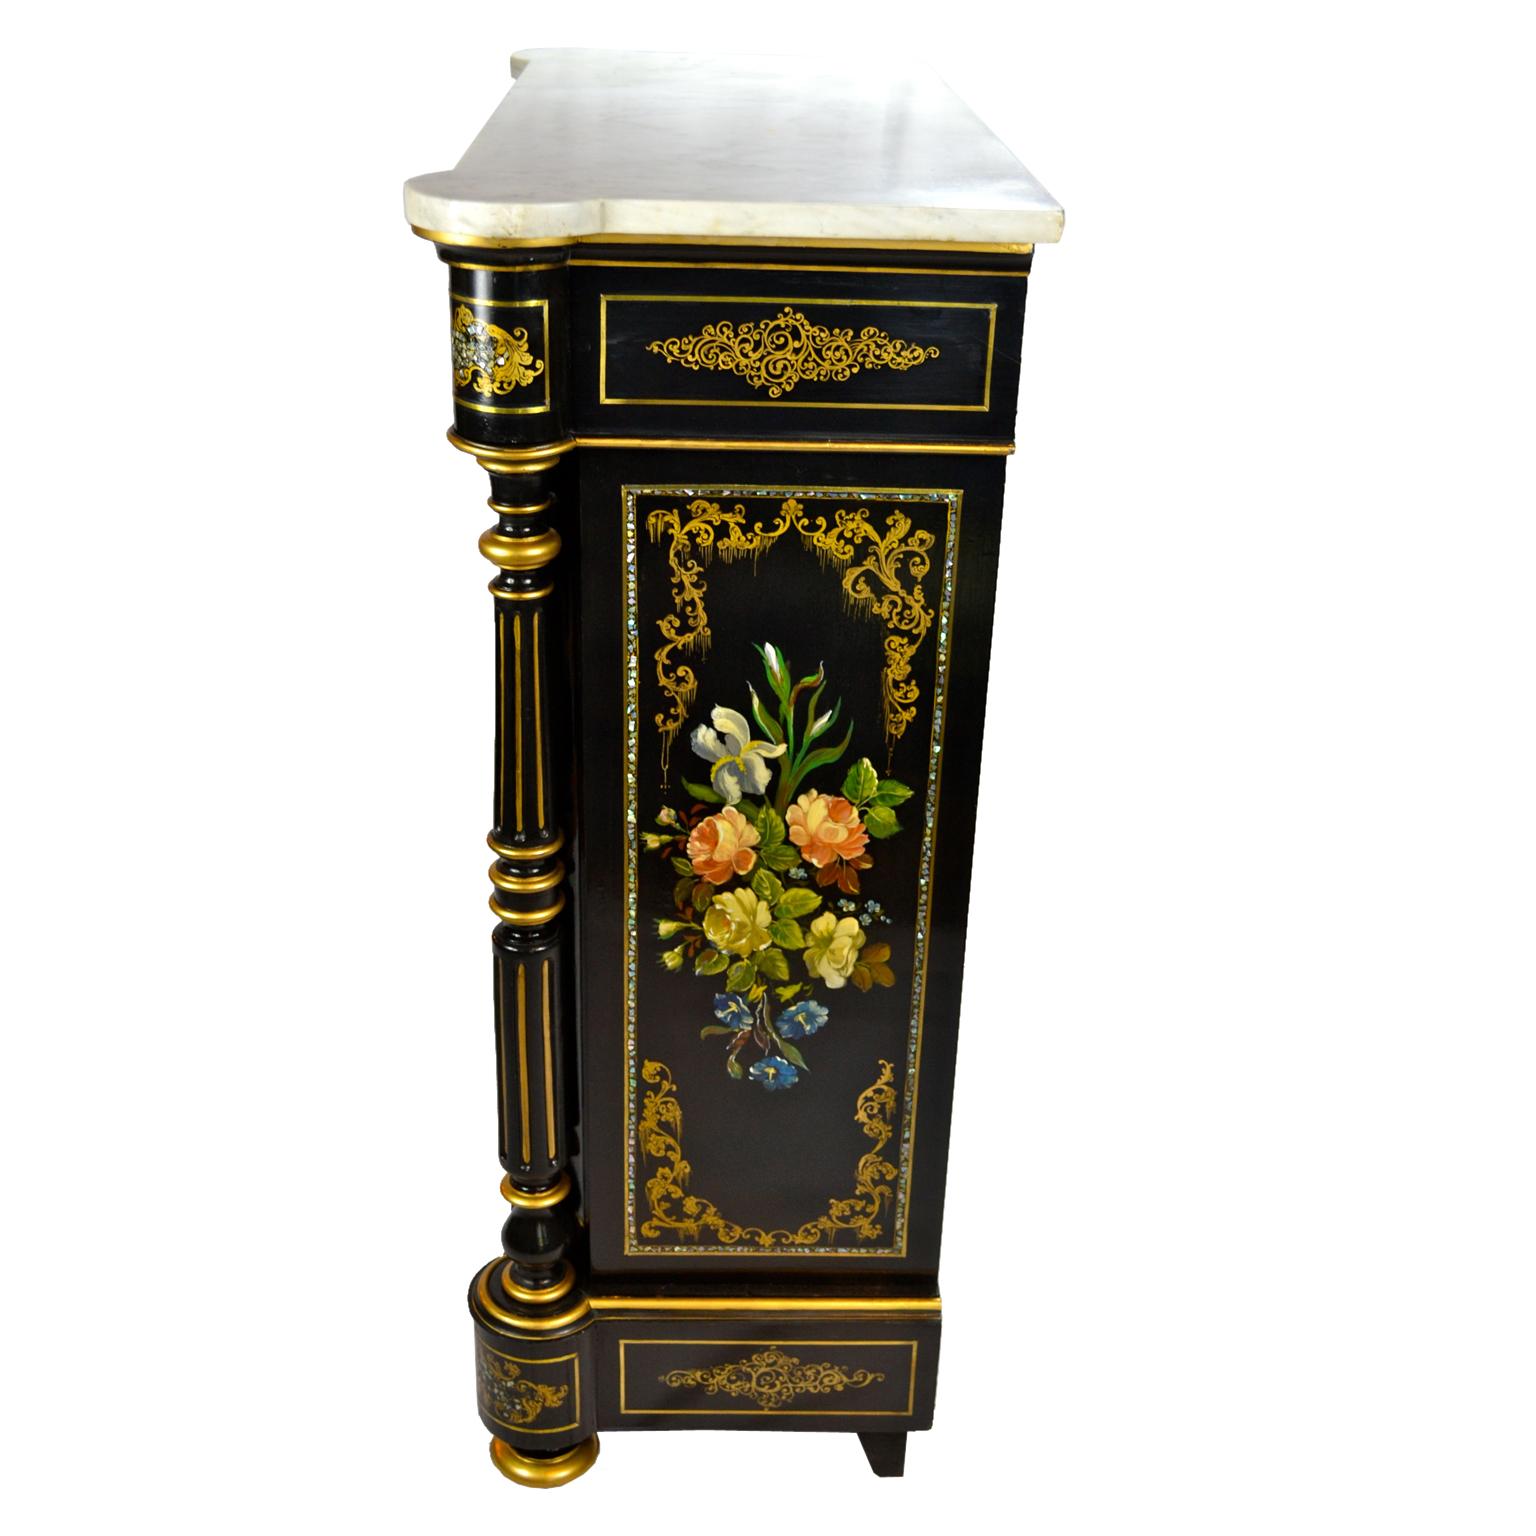 Napoleon III Ebonized and Painted Commode Called Meuble D’appui in French In Good Condition For Sale In Vancouver, British Columbia